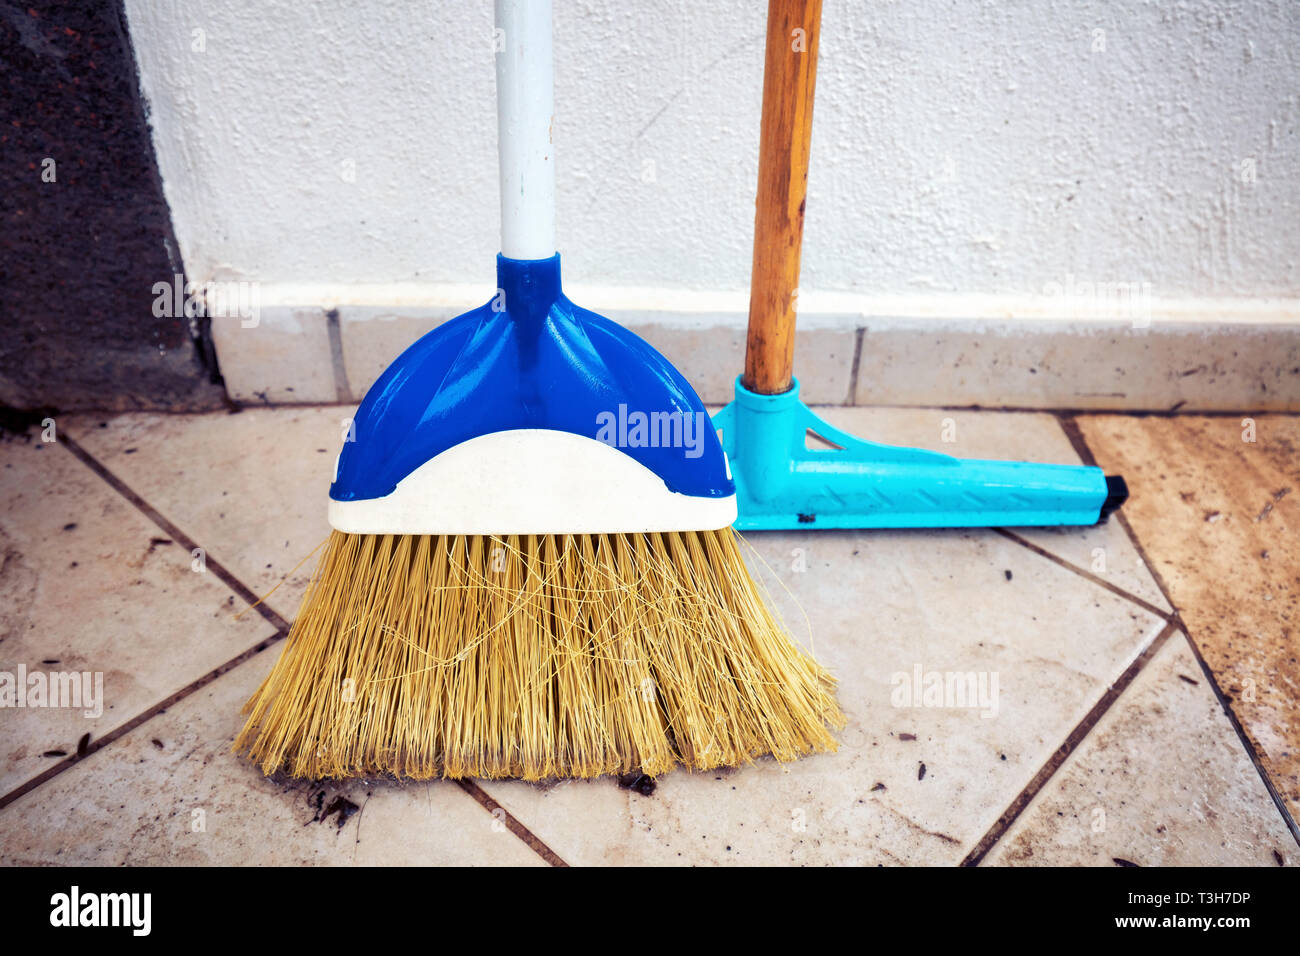 https://c8.alamy.com/comp/T3H7DP/squeegee-mop-and-sweeping-broom-aligned-to-the-wall-and-standing-on-the-tiled-floor-of-the-patio-of-an-house-T3H7DP.jpg